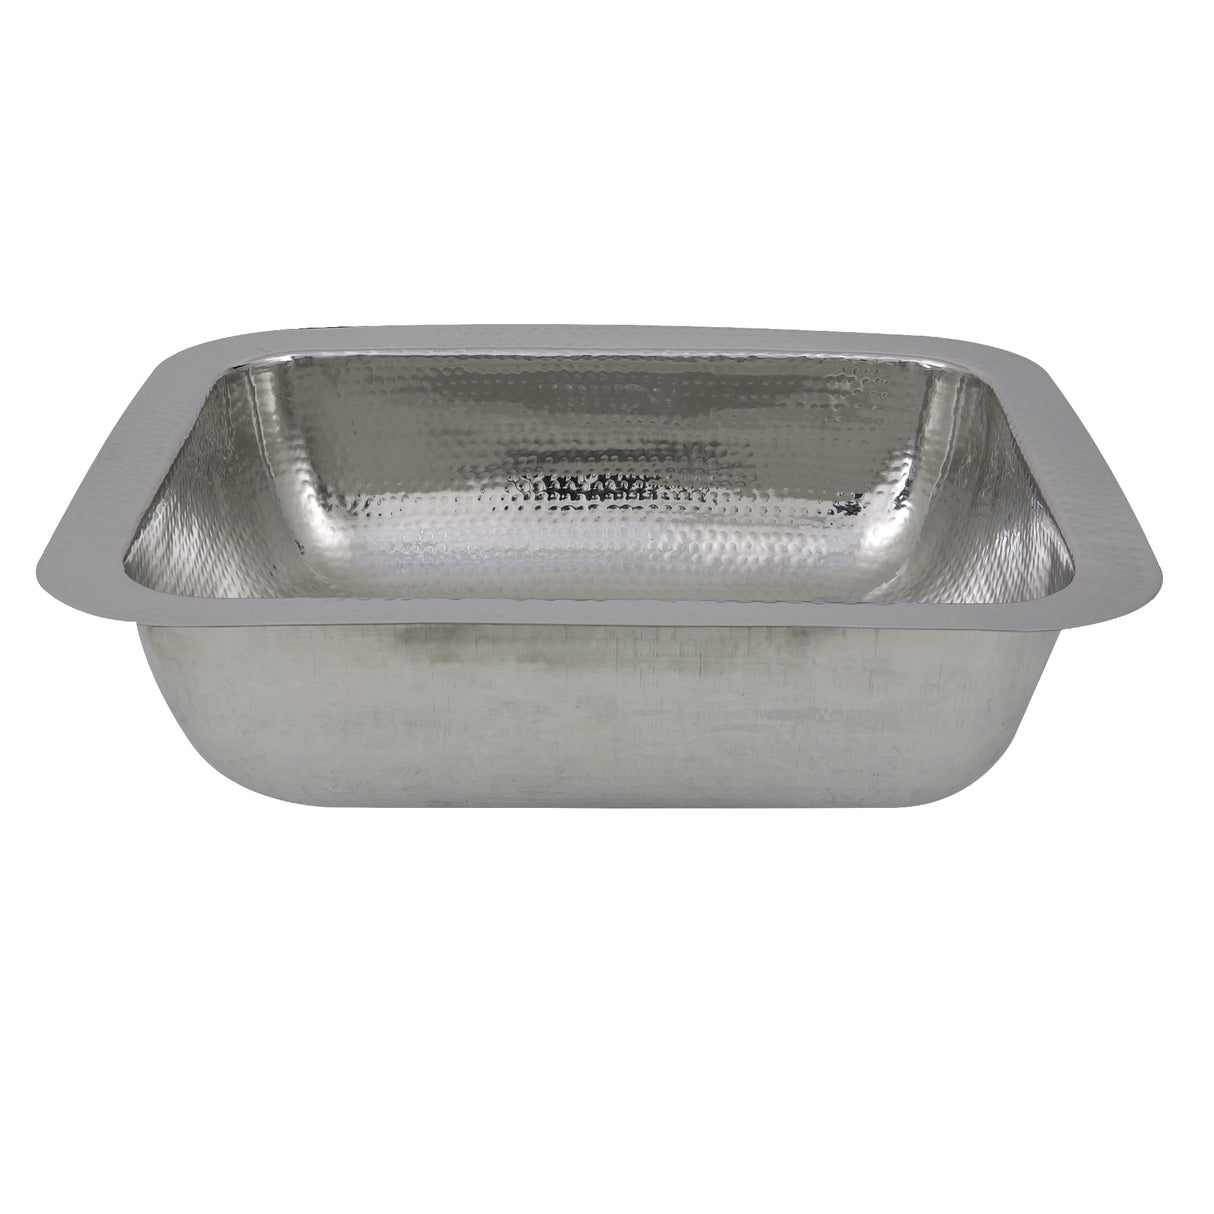 Nantucket Sinks RES - 17.5 Inch Hammered Stainless Steel Rectangle Bar Sink